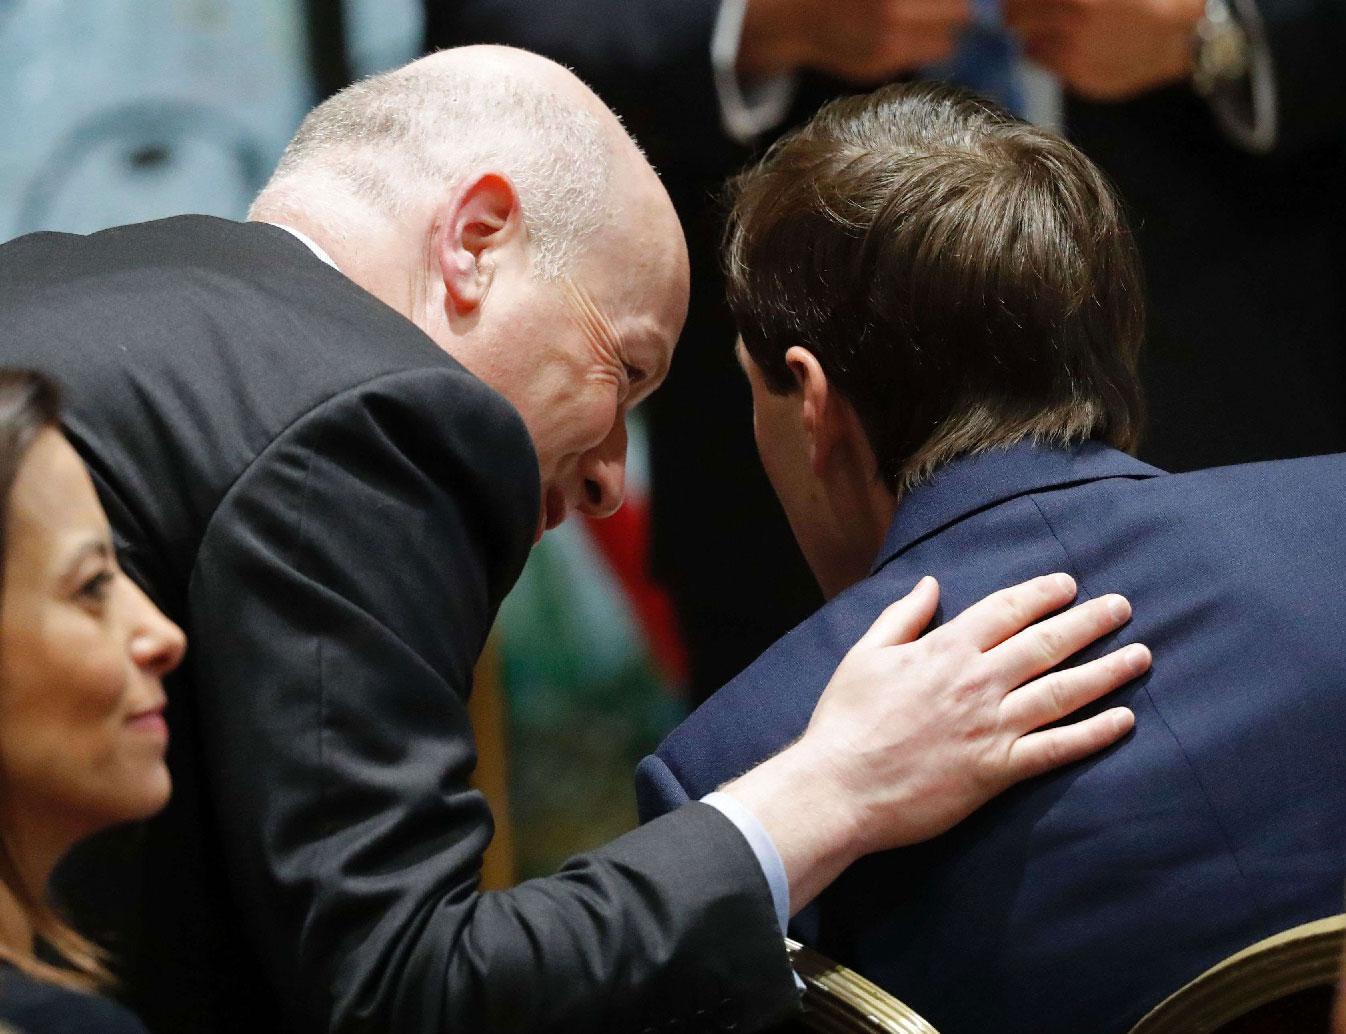 Jason Greenblatt (L) the US president's assistant and special representative for international negotiations, speaks to White House senior advisor Jared Kushner (C) during a press conference at the Israeli President's Residence in Jerusalem on May 22, 2017.